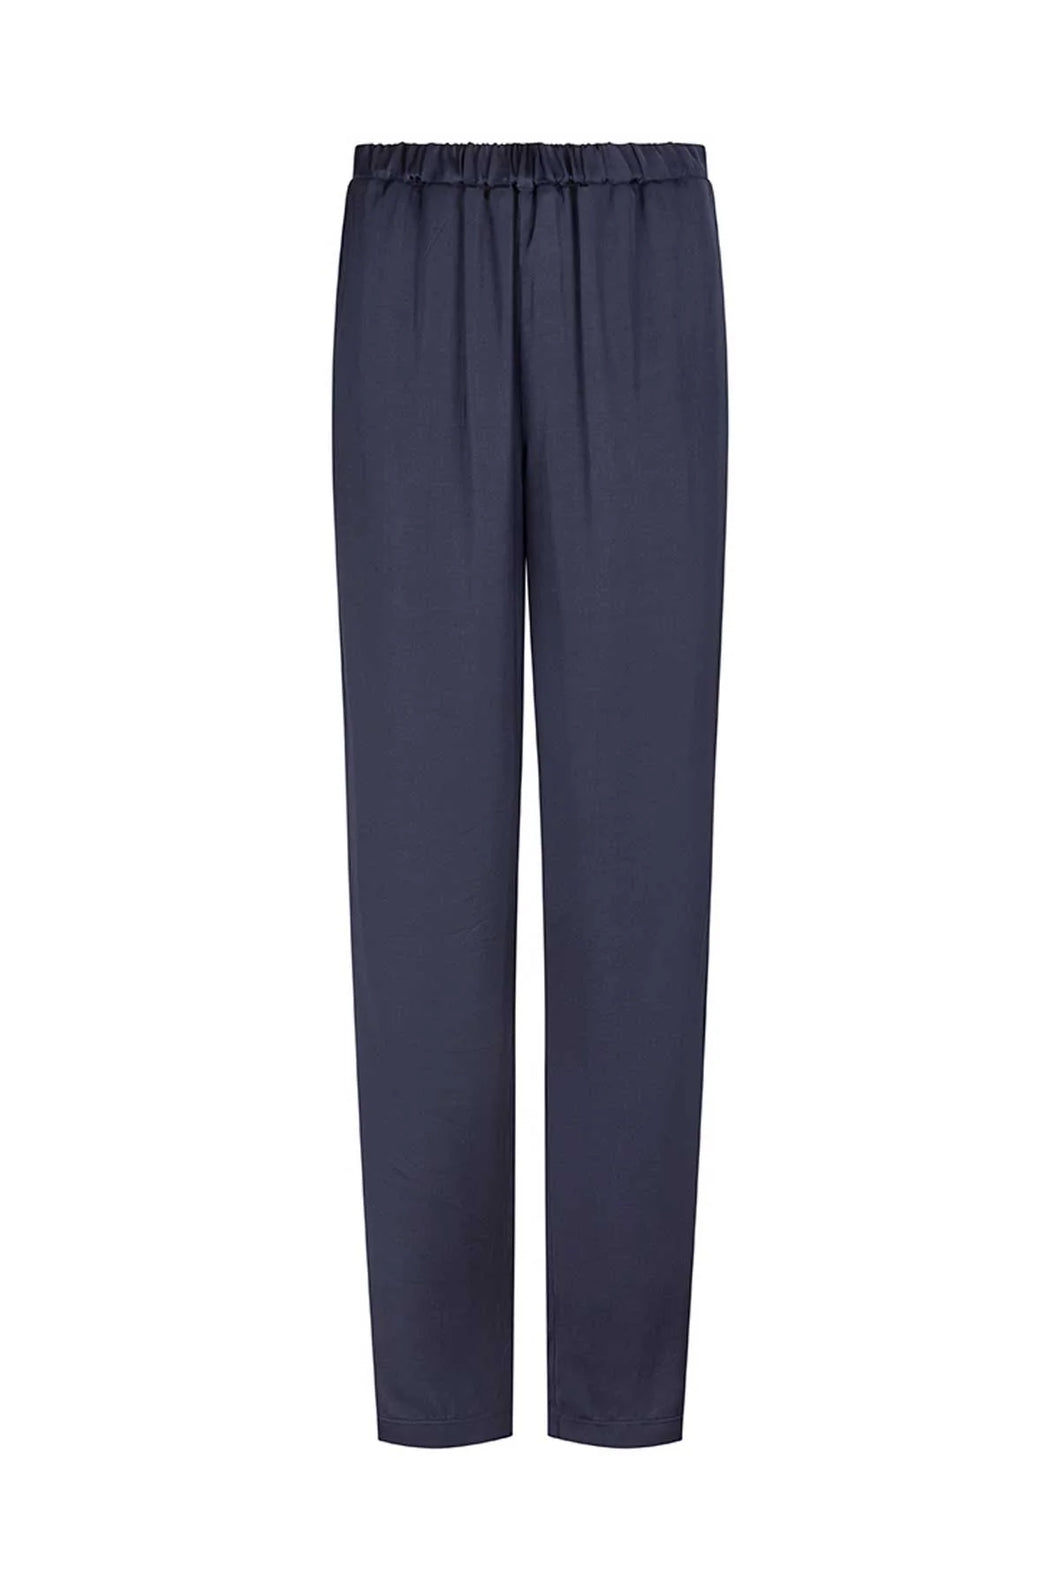 Ruby Tuesday Rybie Straight Wide Leg Pants Navy T309-1641